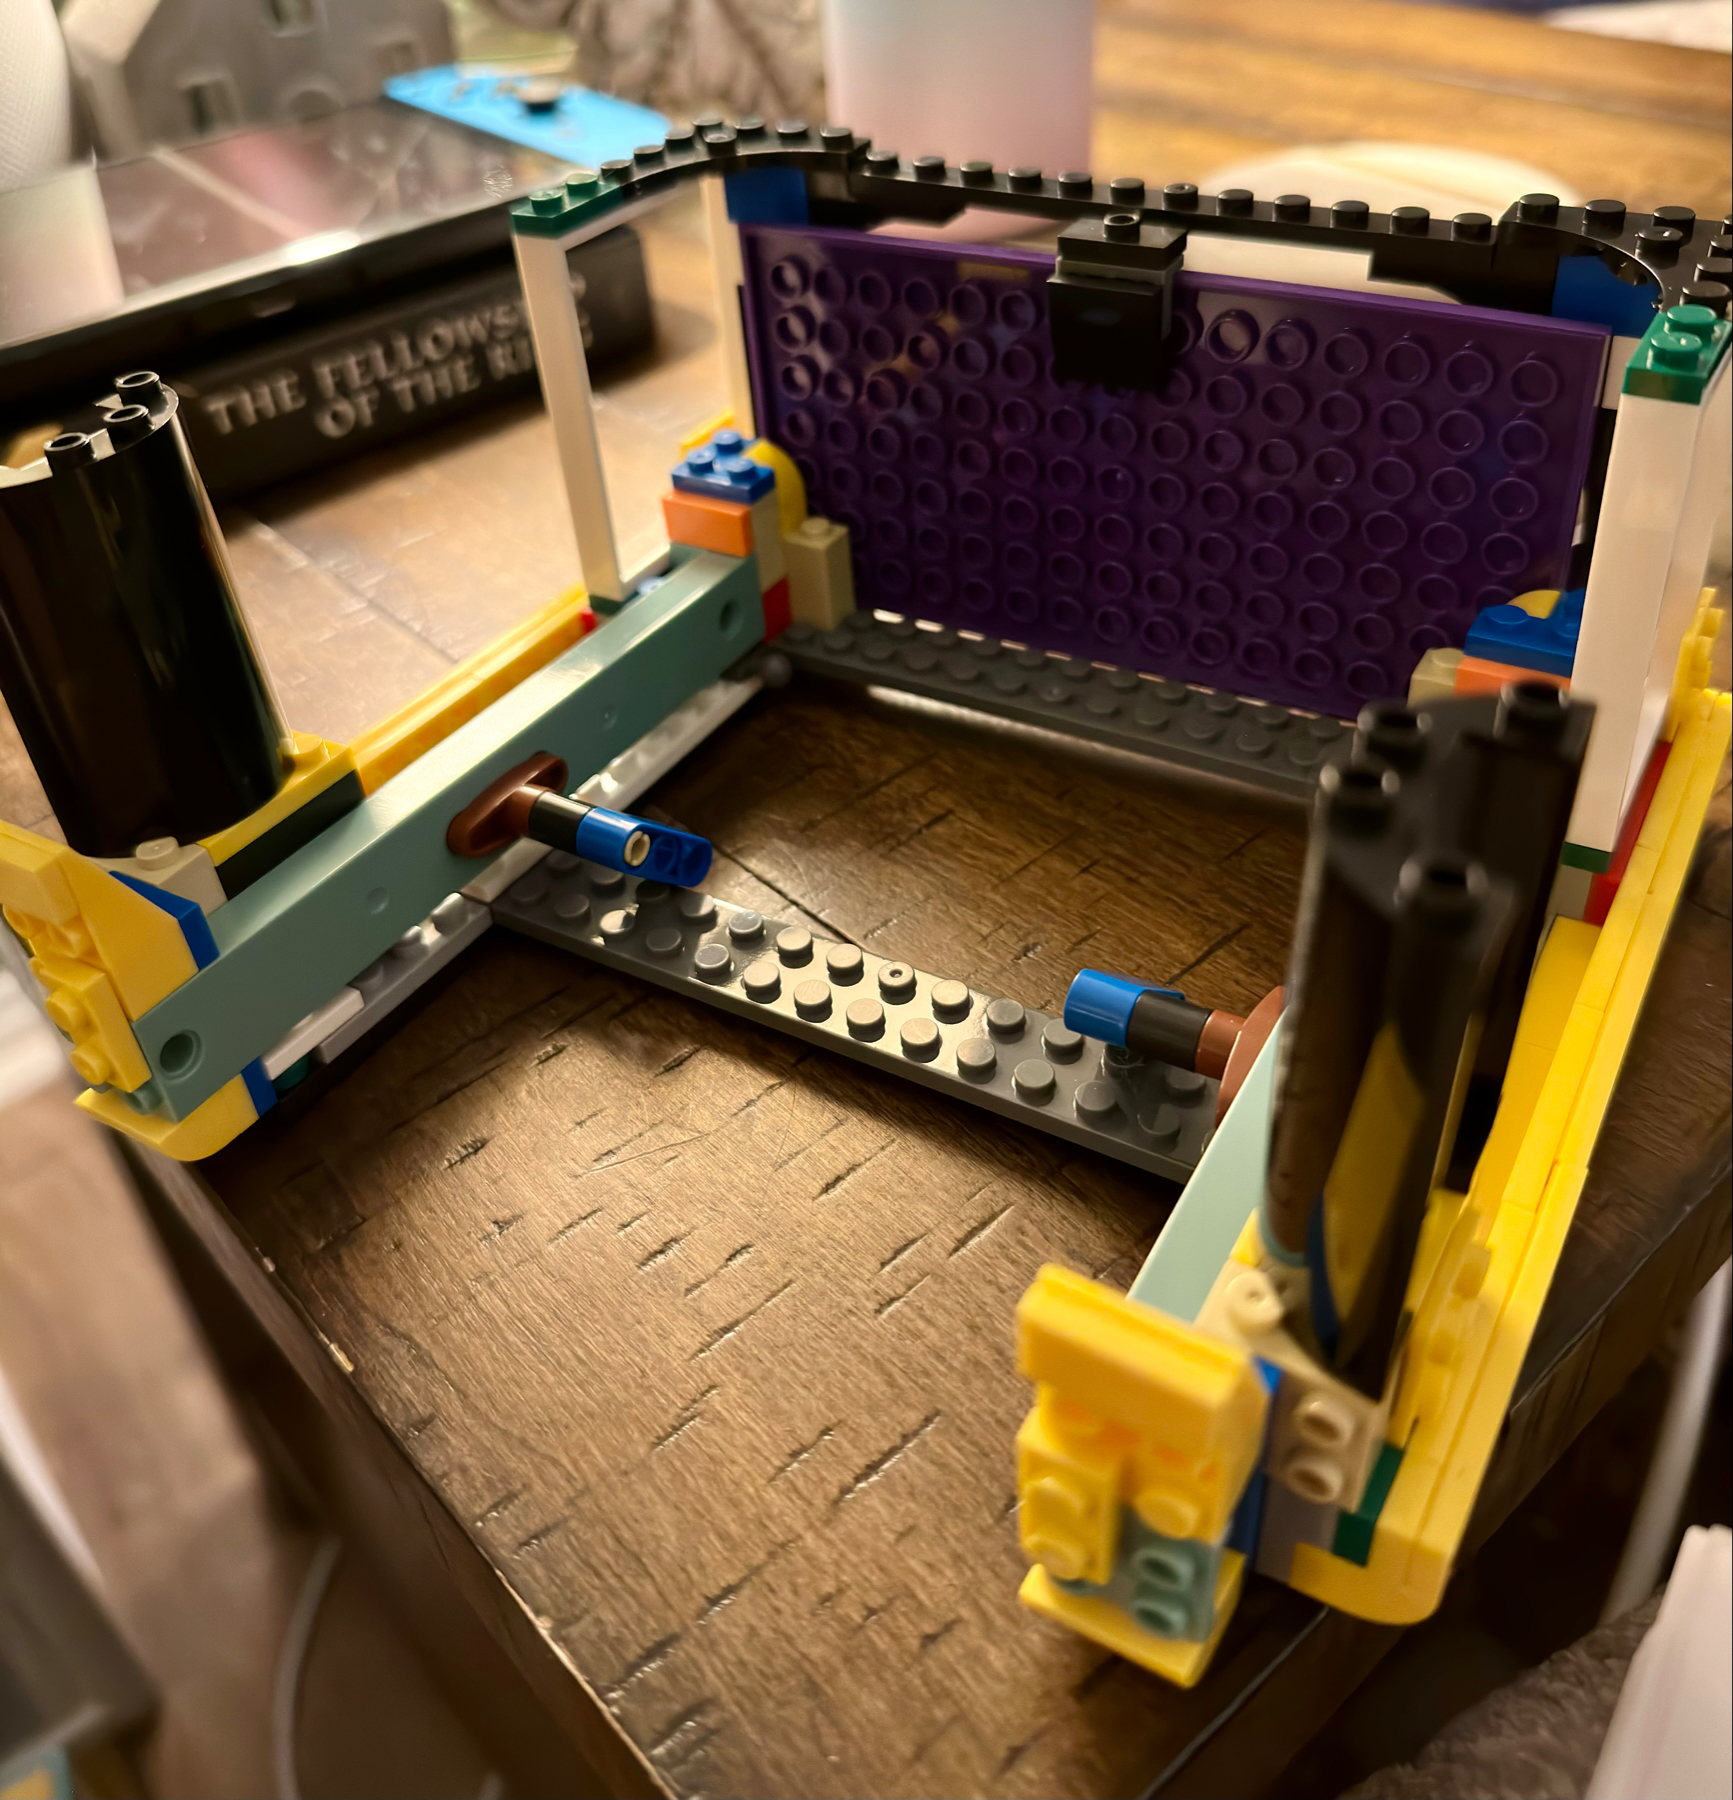 A partially assembled LEGO structure showcasing various colorful pieces and bricks on a wooden surface. The construction features black, yellow, blue, green, and purple elements, indicating an early stage of the building process.